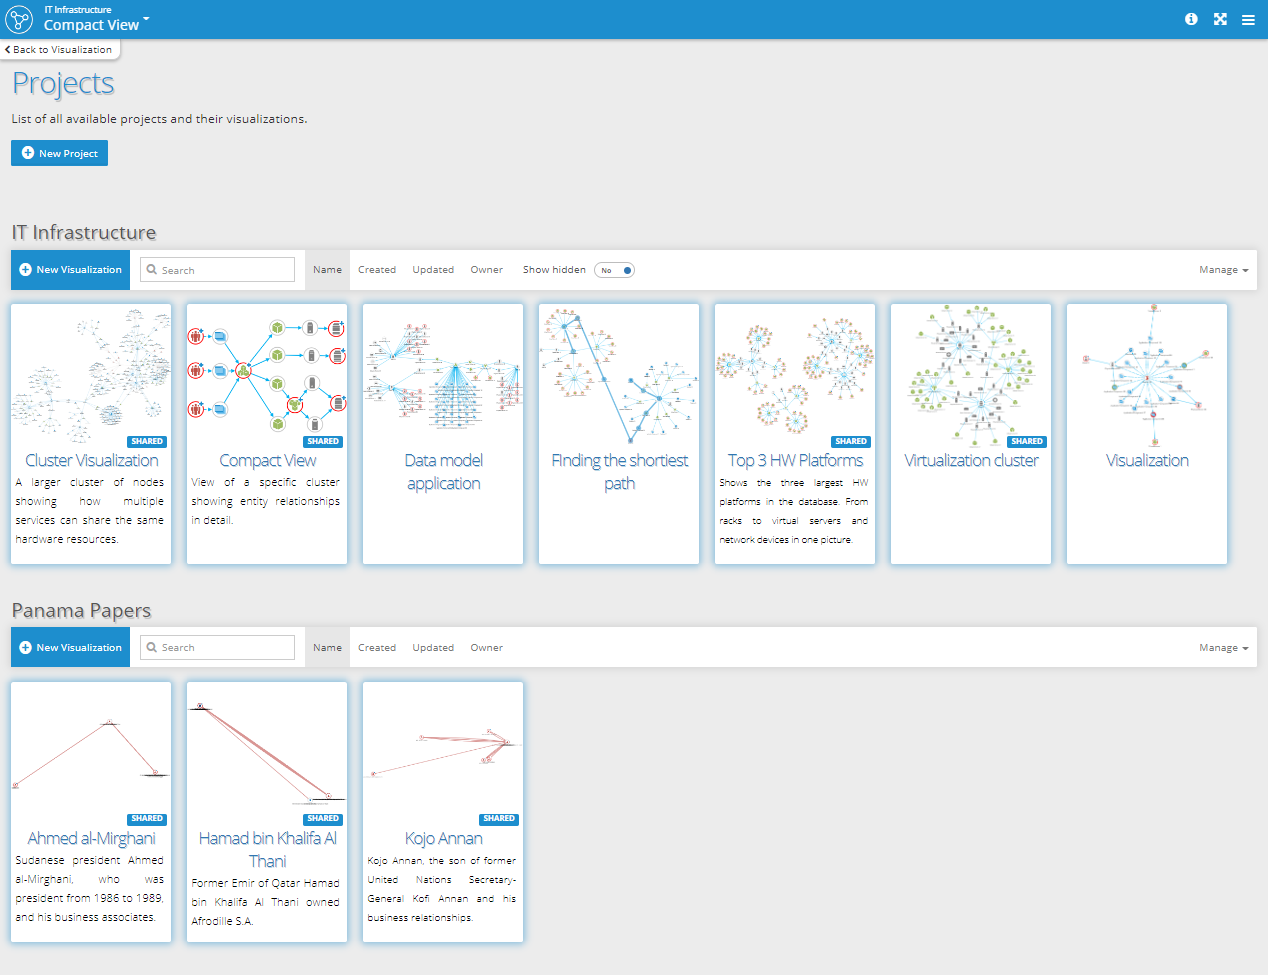 Graphlytic projects allows managing multiple knowledge graphs in one platform